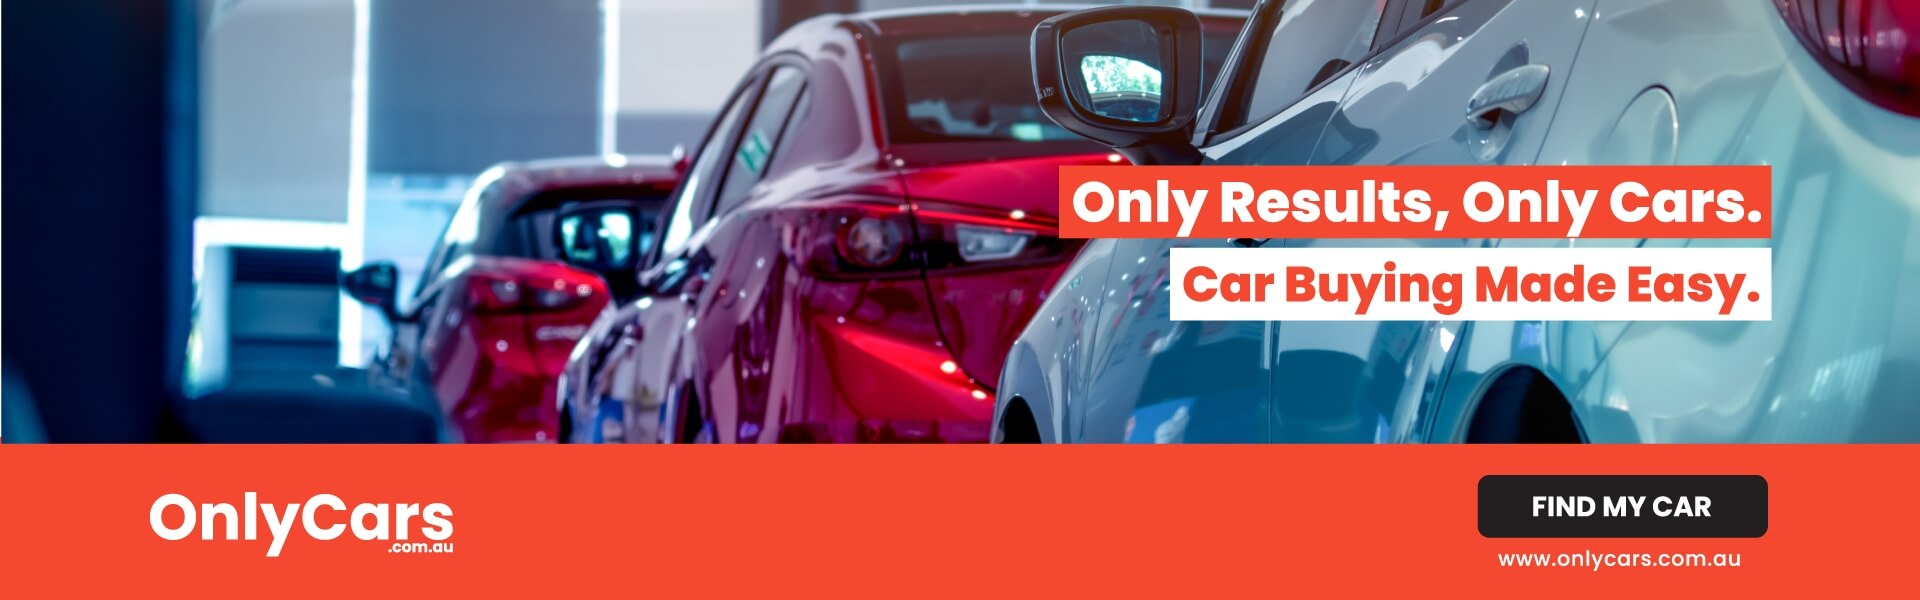 Only Cars hero banner